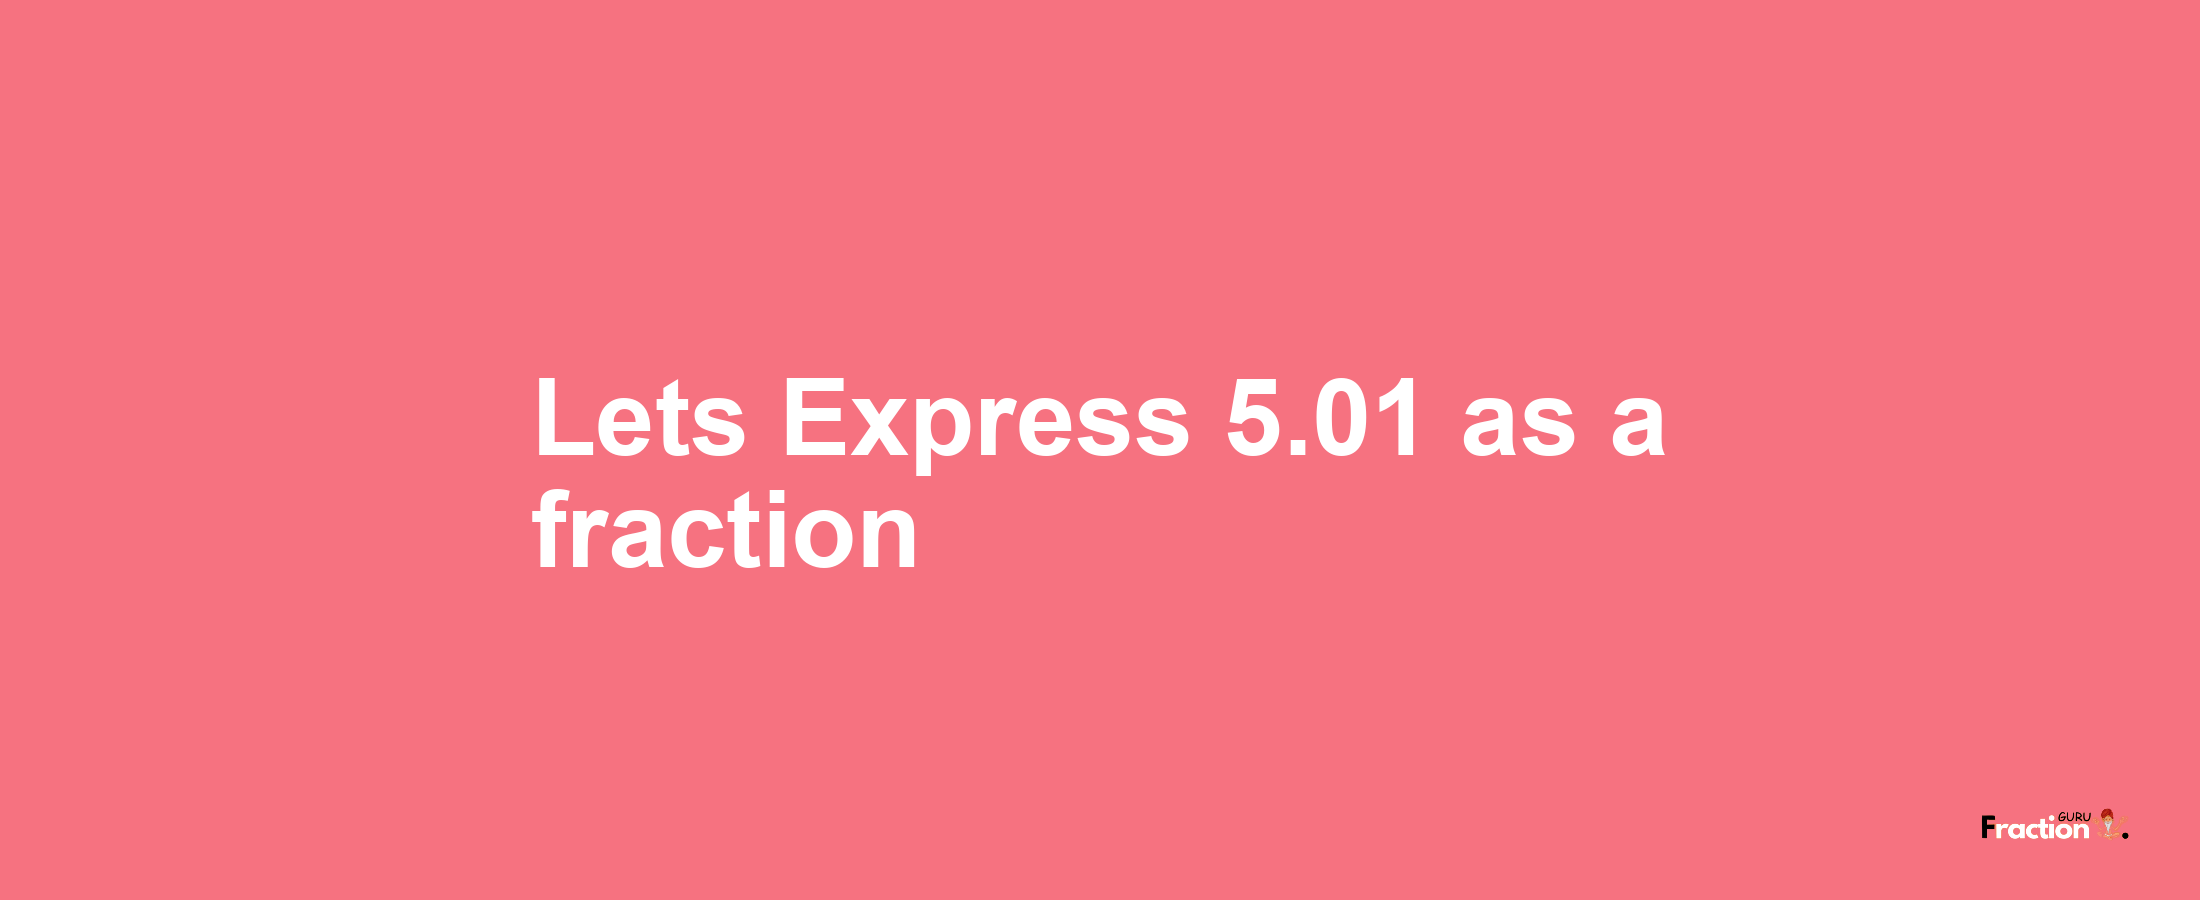 Lets Express 5.01 as afraction